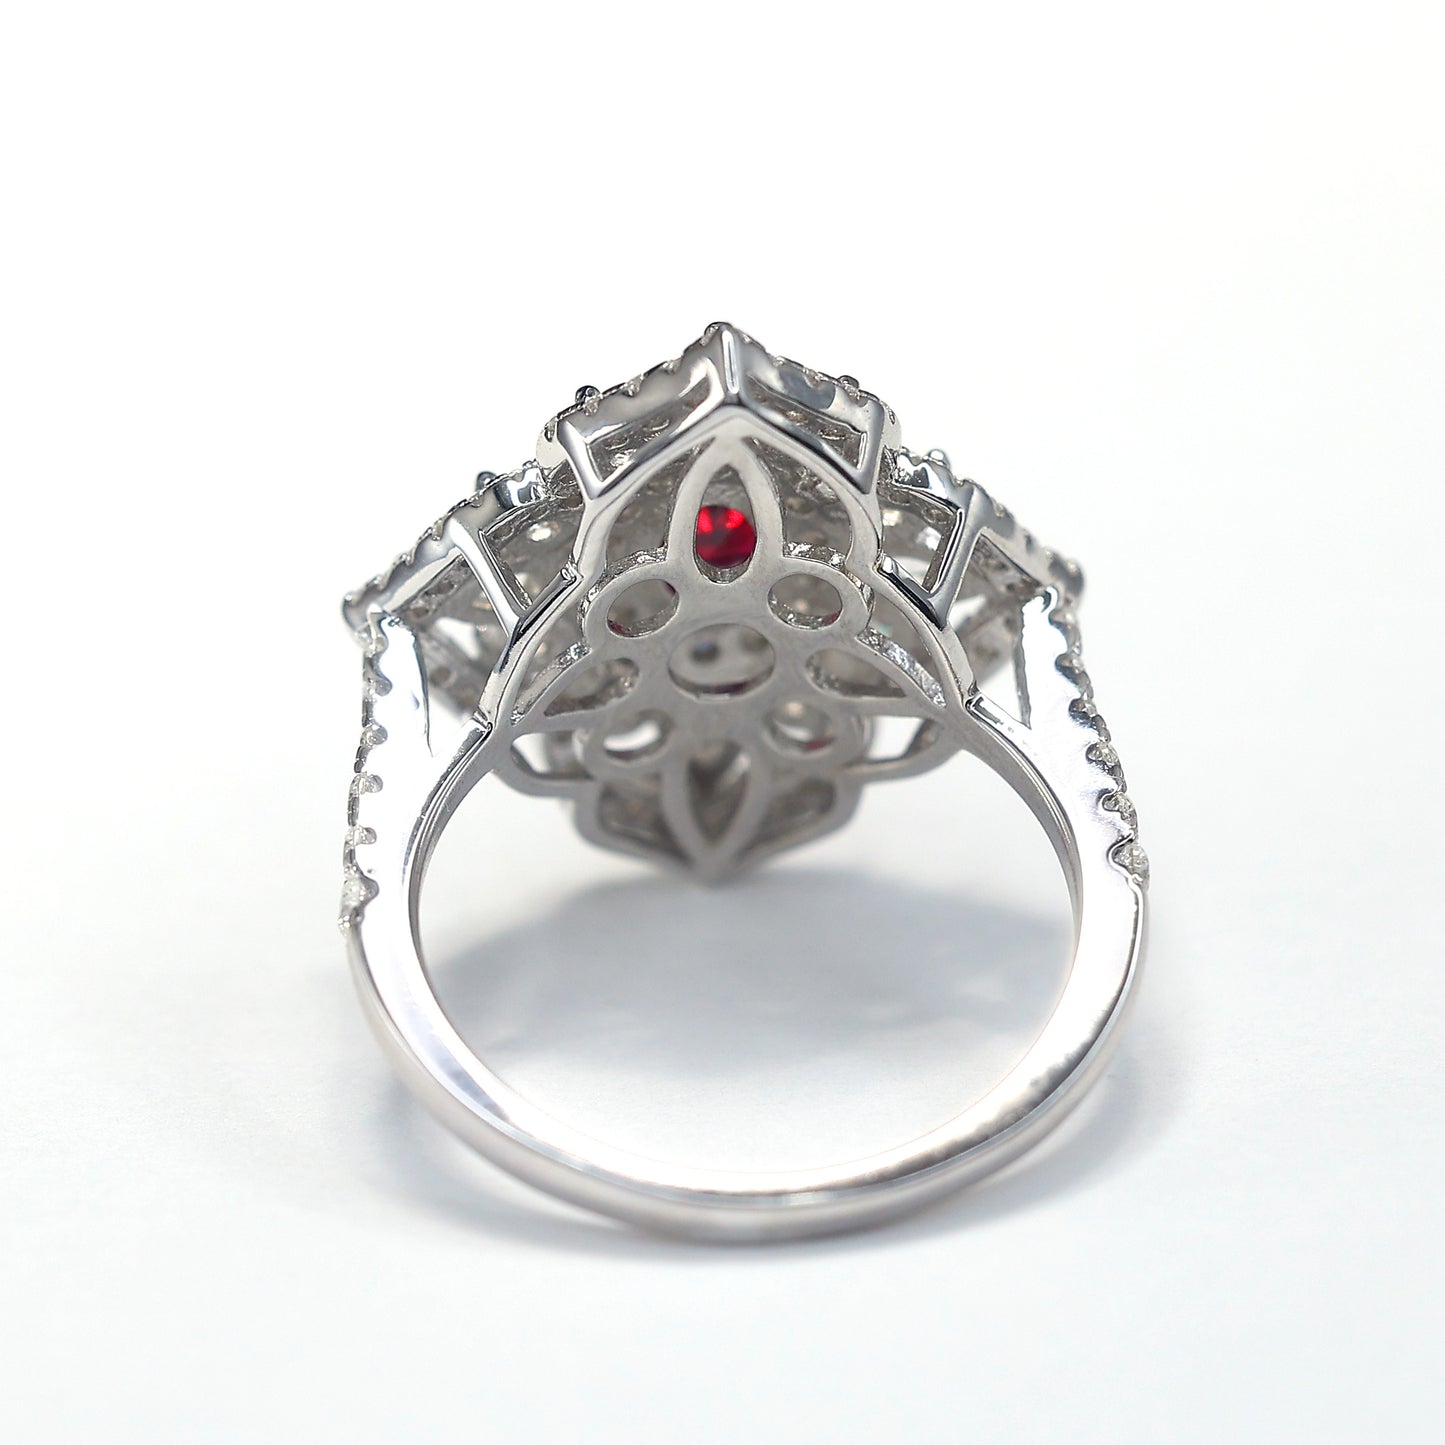 Micro-setting ruby color lab created stones fancy Four Leaf Clover ring, sterling silver